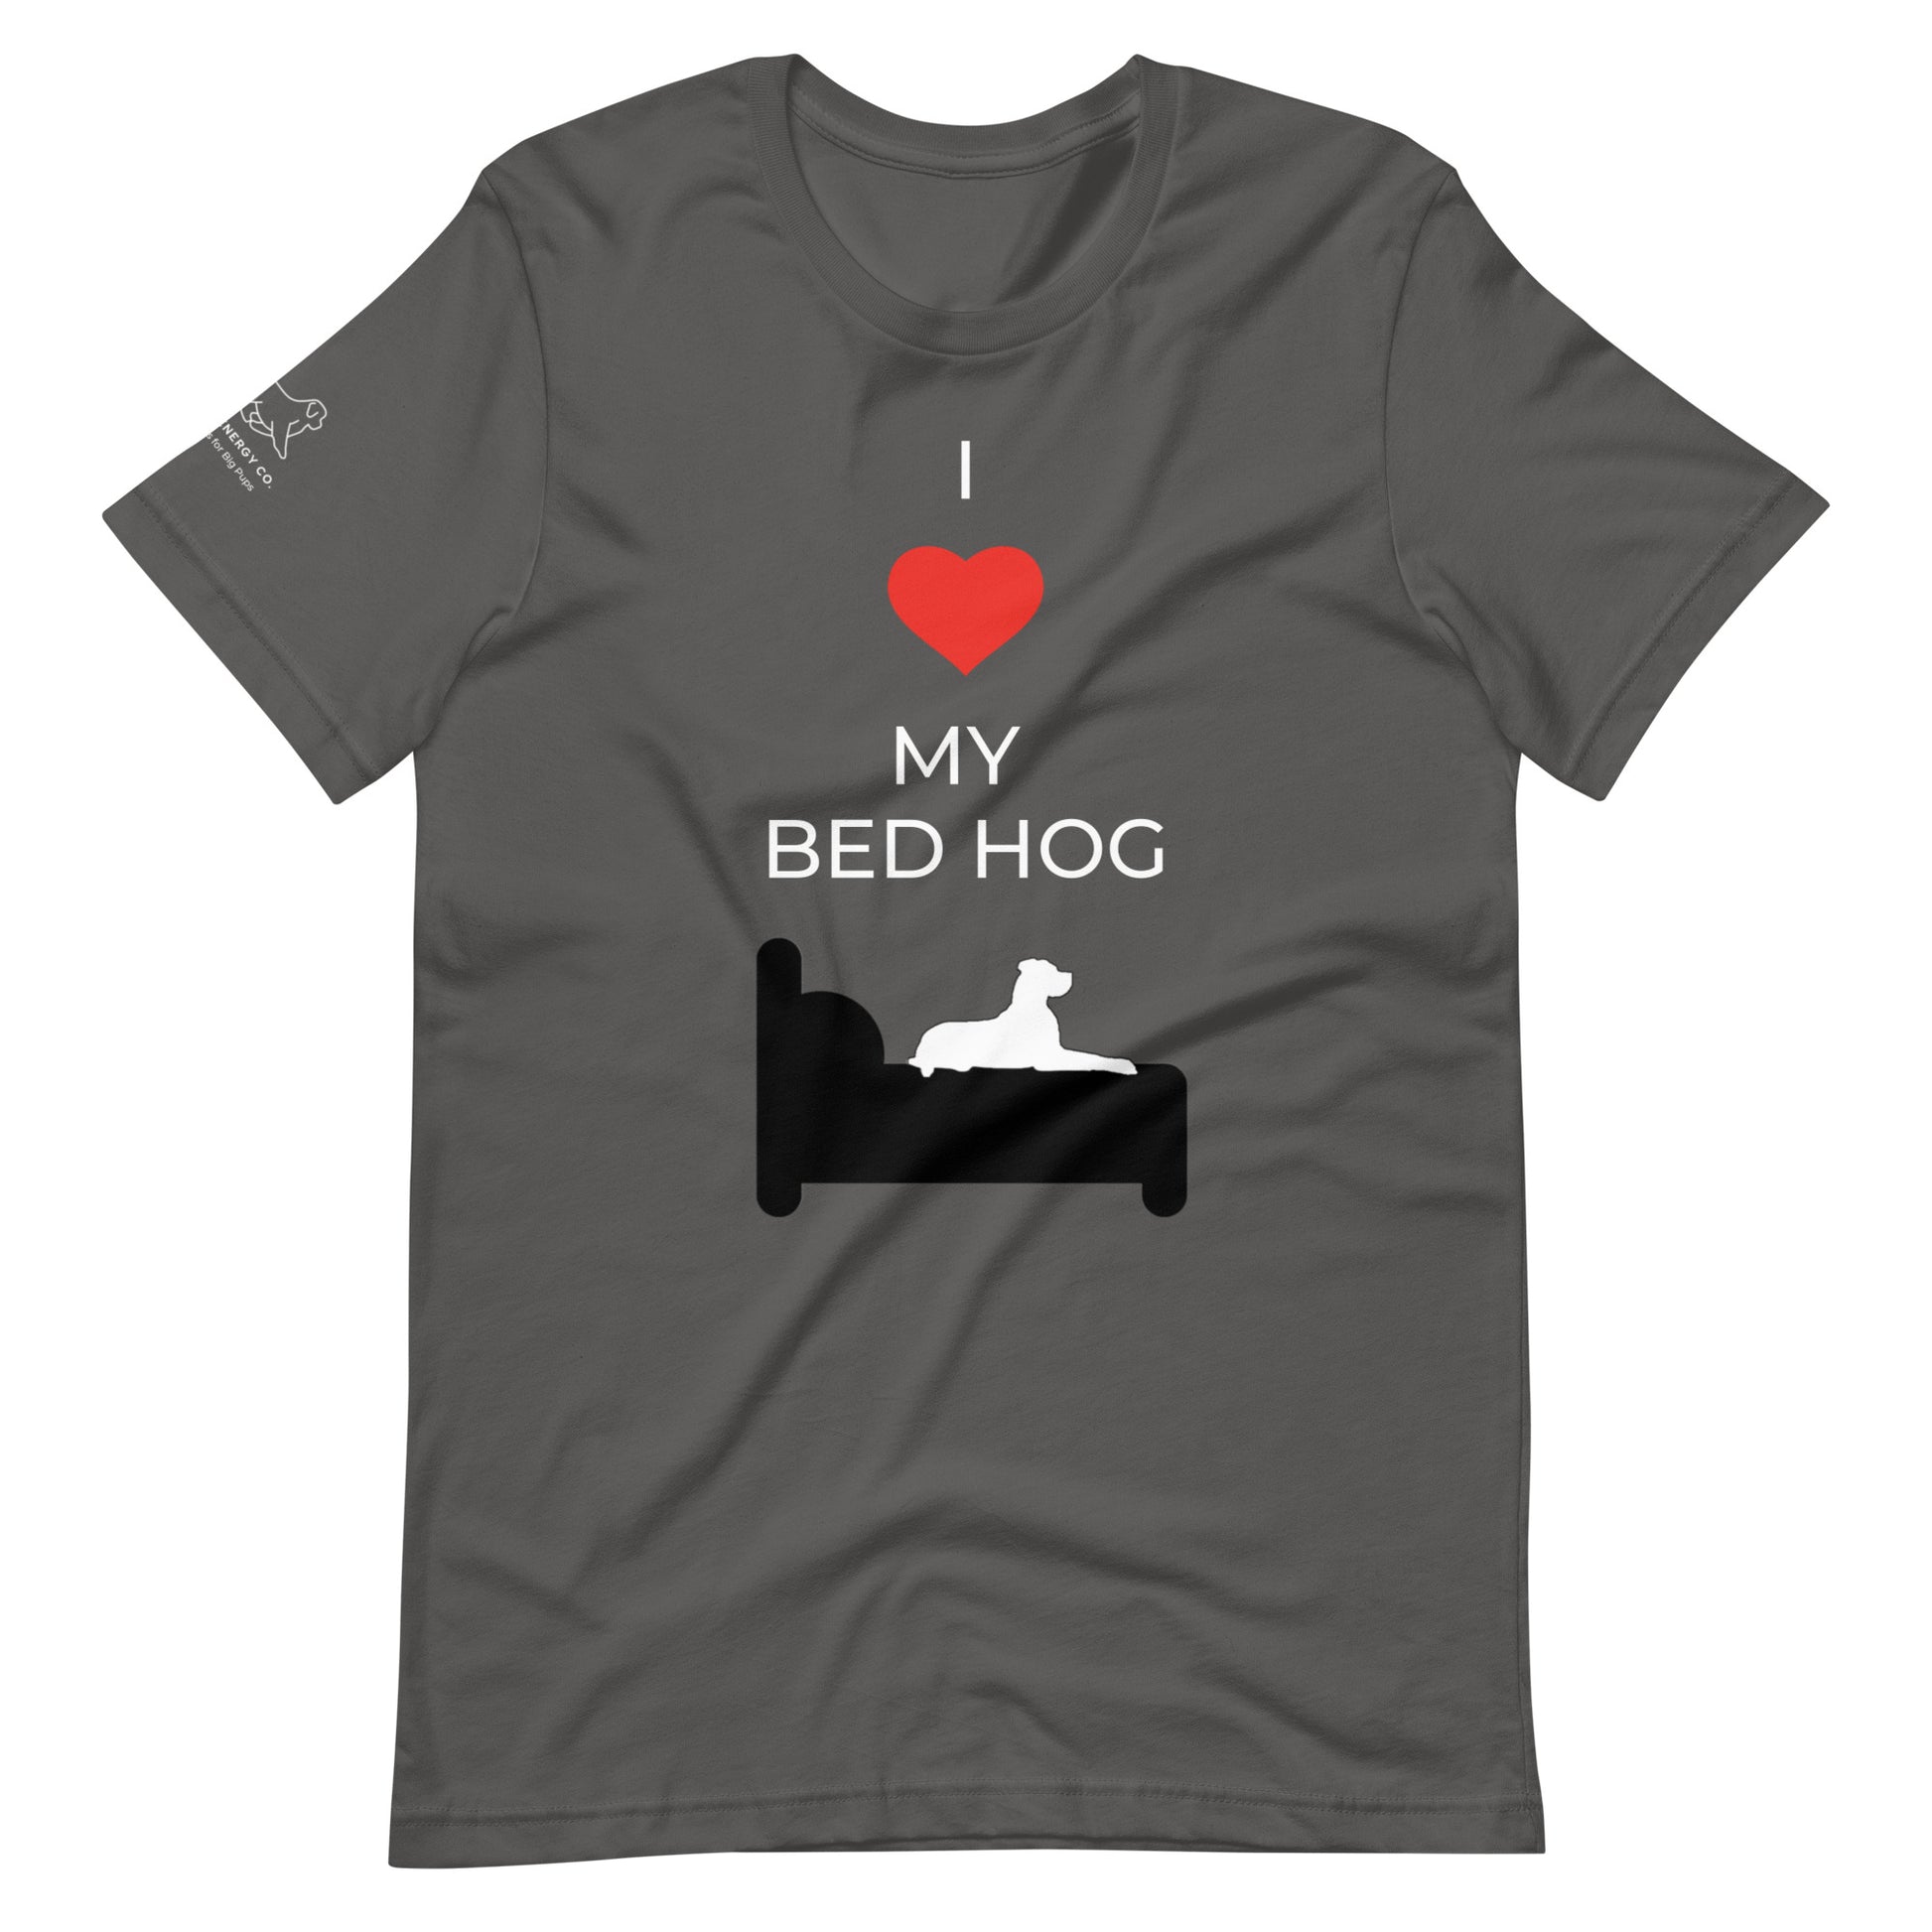 Front of an asphalt grey t-shirt that reads "I love my bed hog" in white text over an illustration that is the white silhouette of a large dog laying on the dark silhouette of a bed. The word "love" is replaced by a red heart symbol.